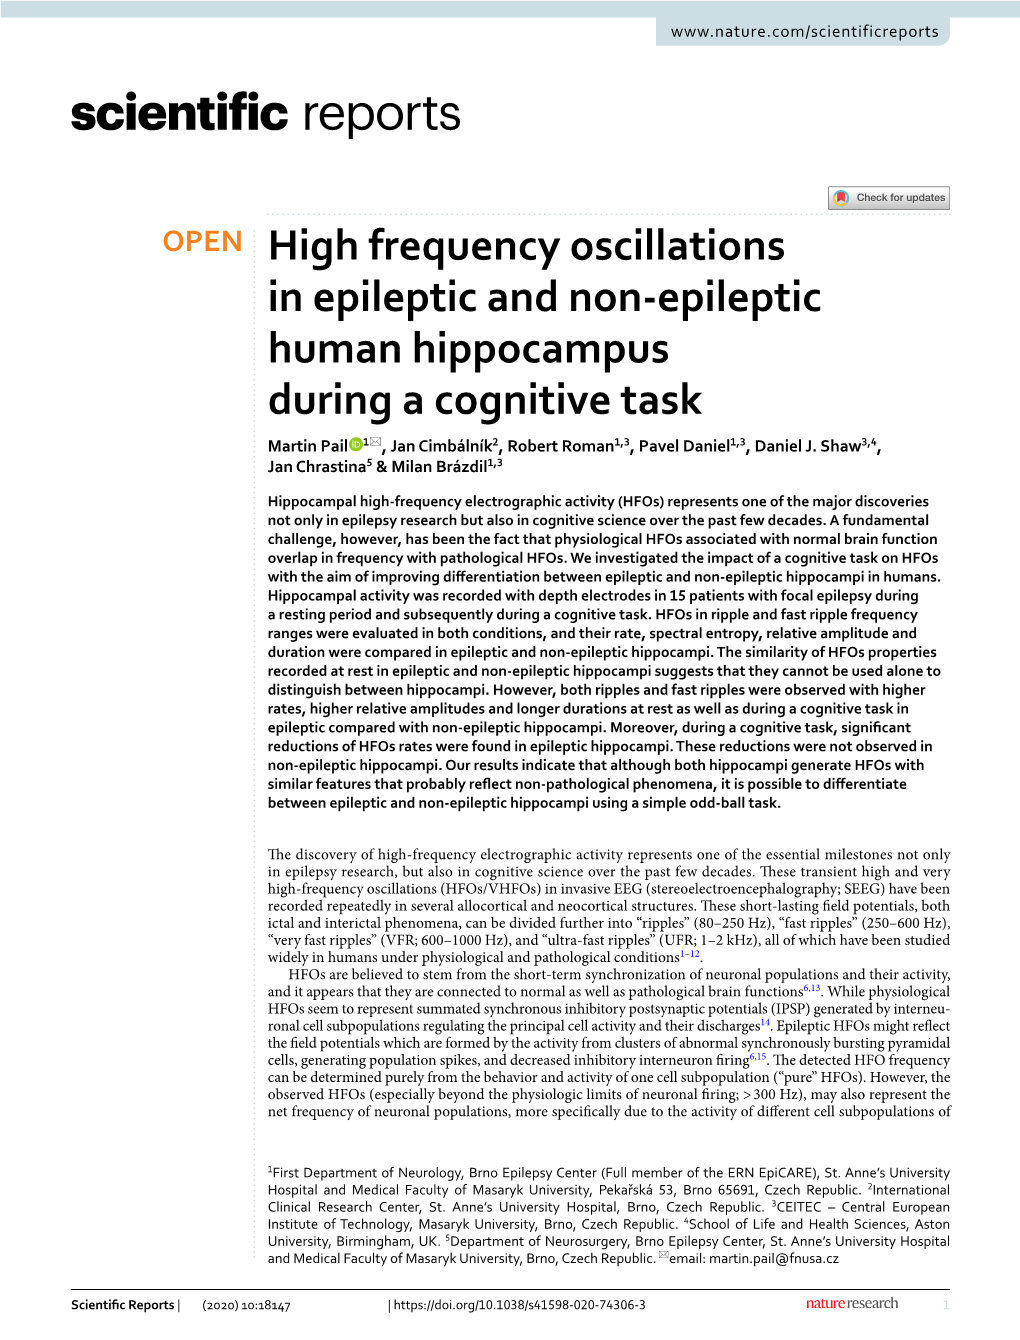 High Frequency Oscillations in Epileptic and Non-Epileptic Human